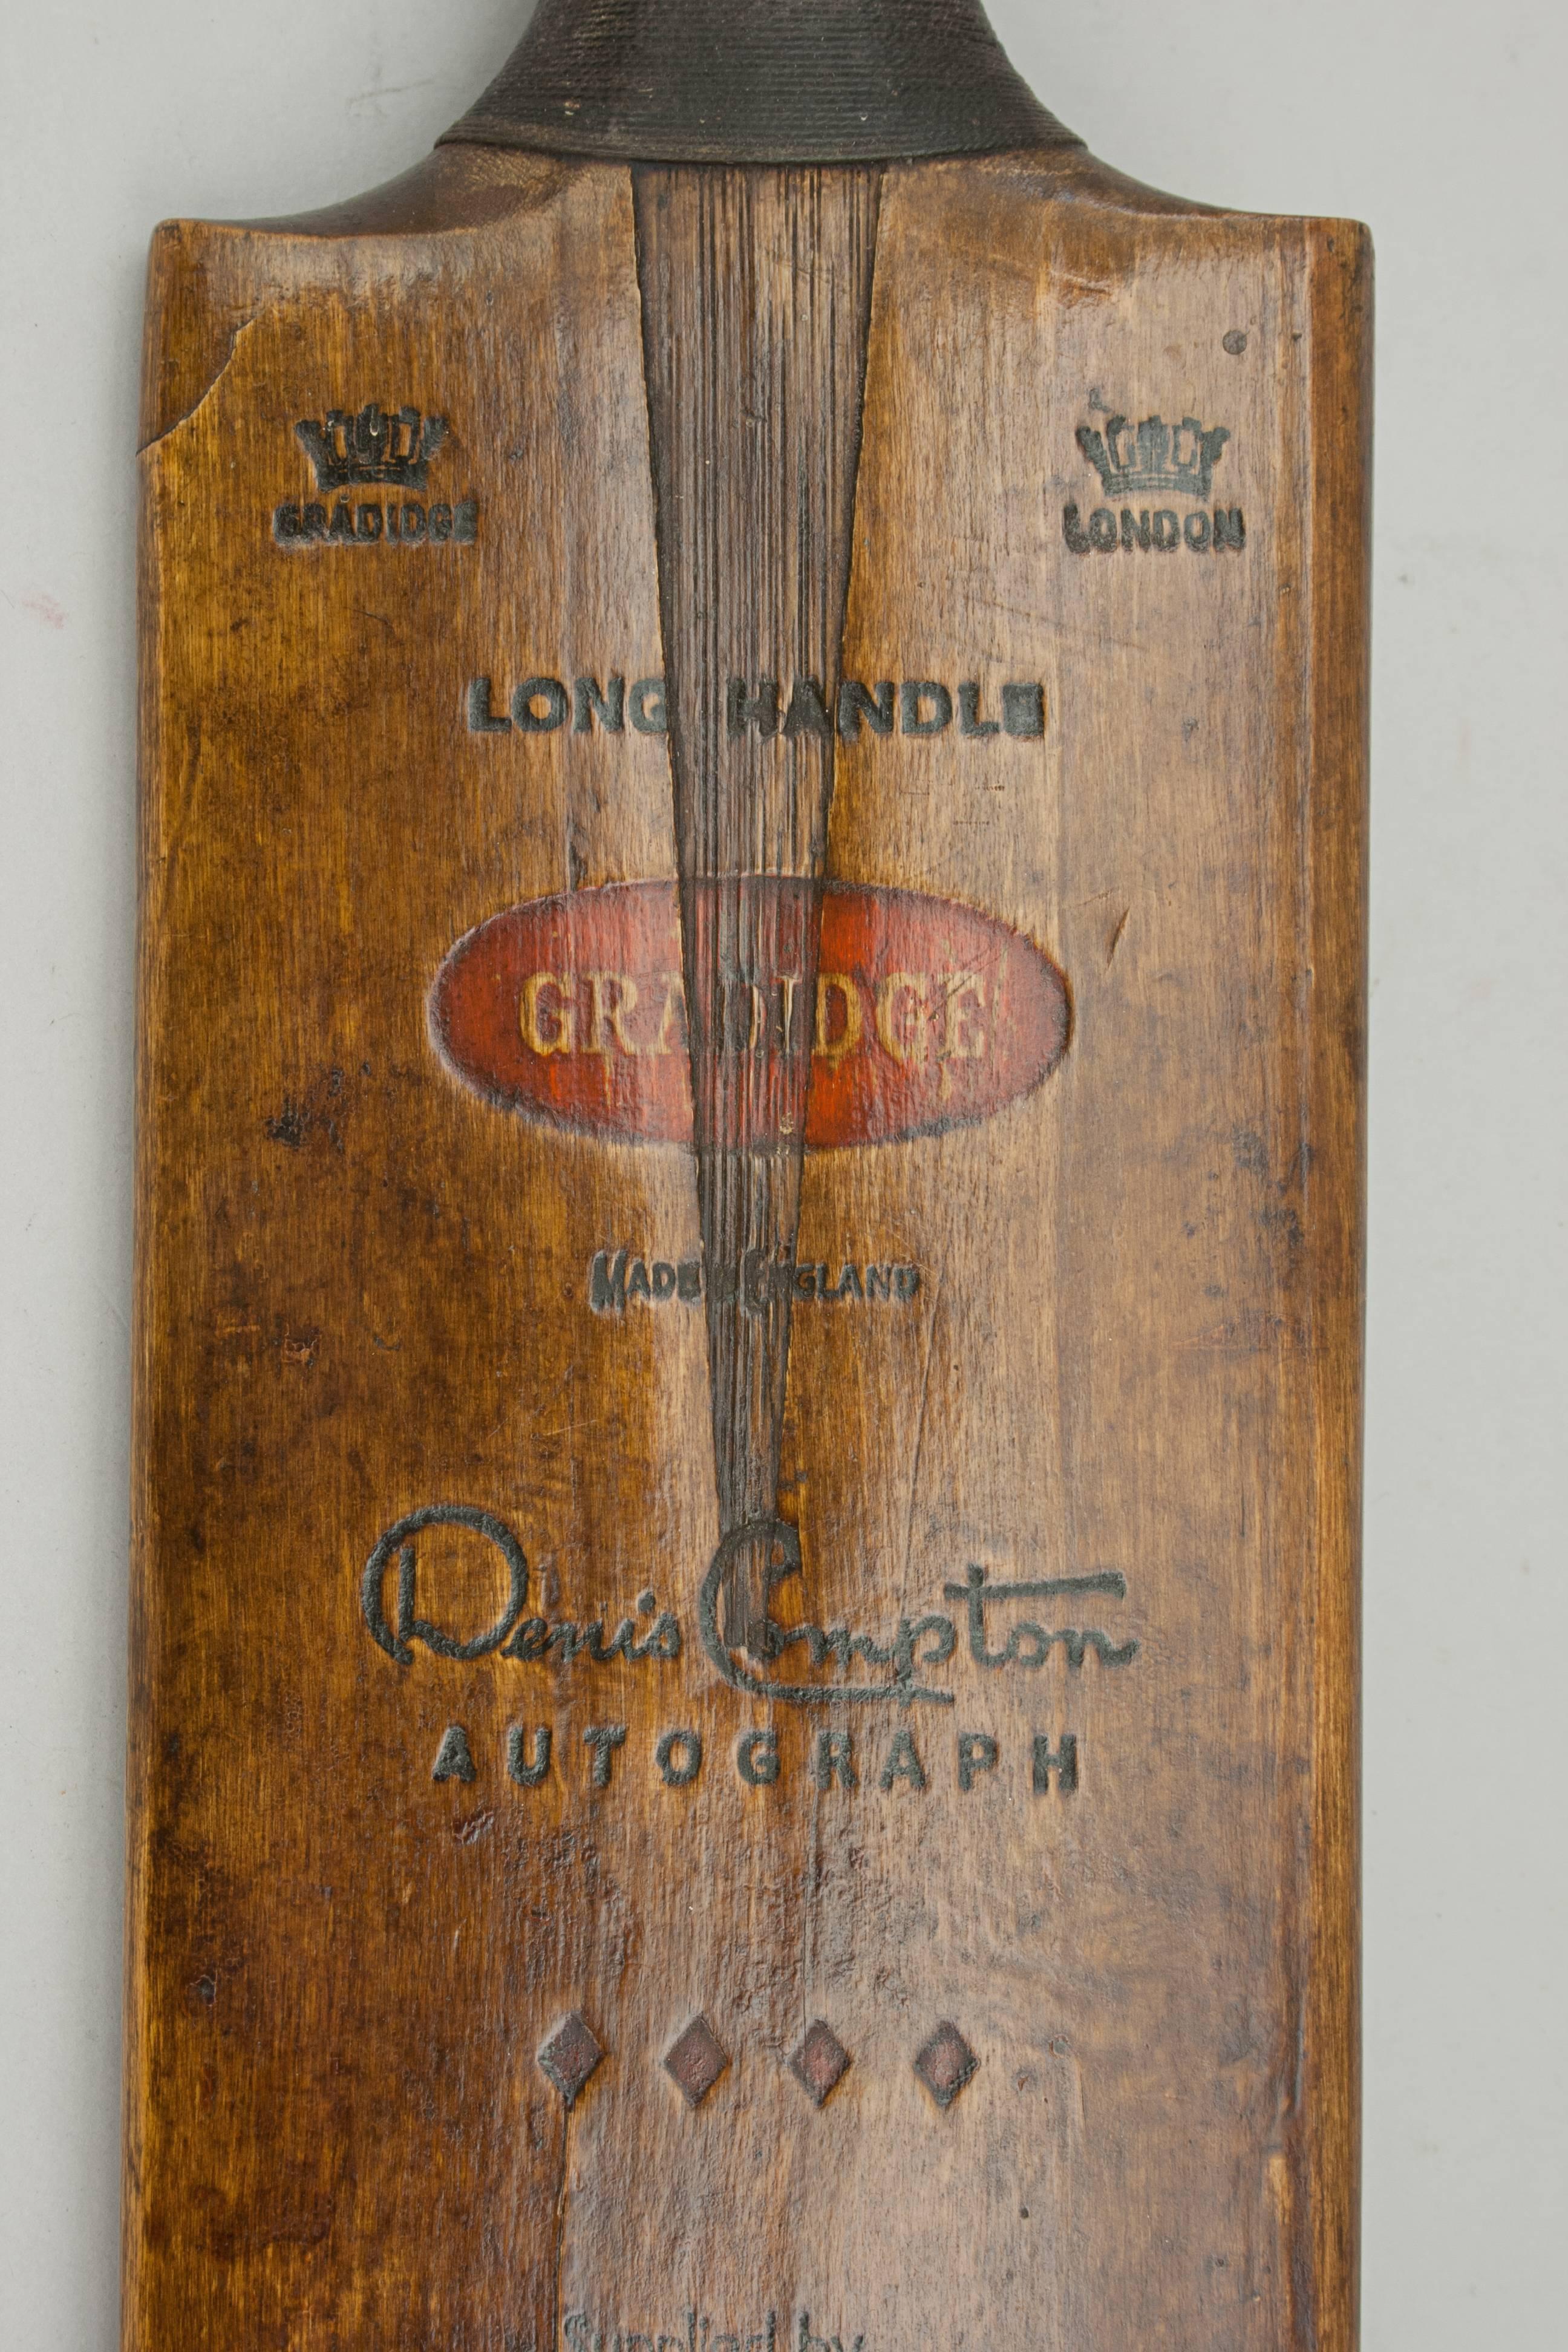 Vintage Gradidge cricket bat.
A good willow cricket bat by Gradidge of London. The 'Denis Compton' autograph bat is in good condition with a lovely dark patina. The blade is embossed with a crown on each shoulder, the words 'Gradidge' under one,